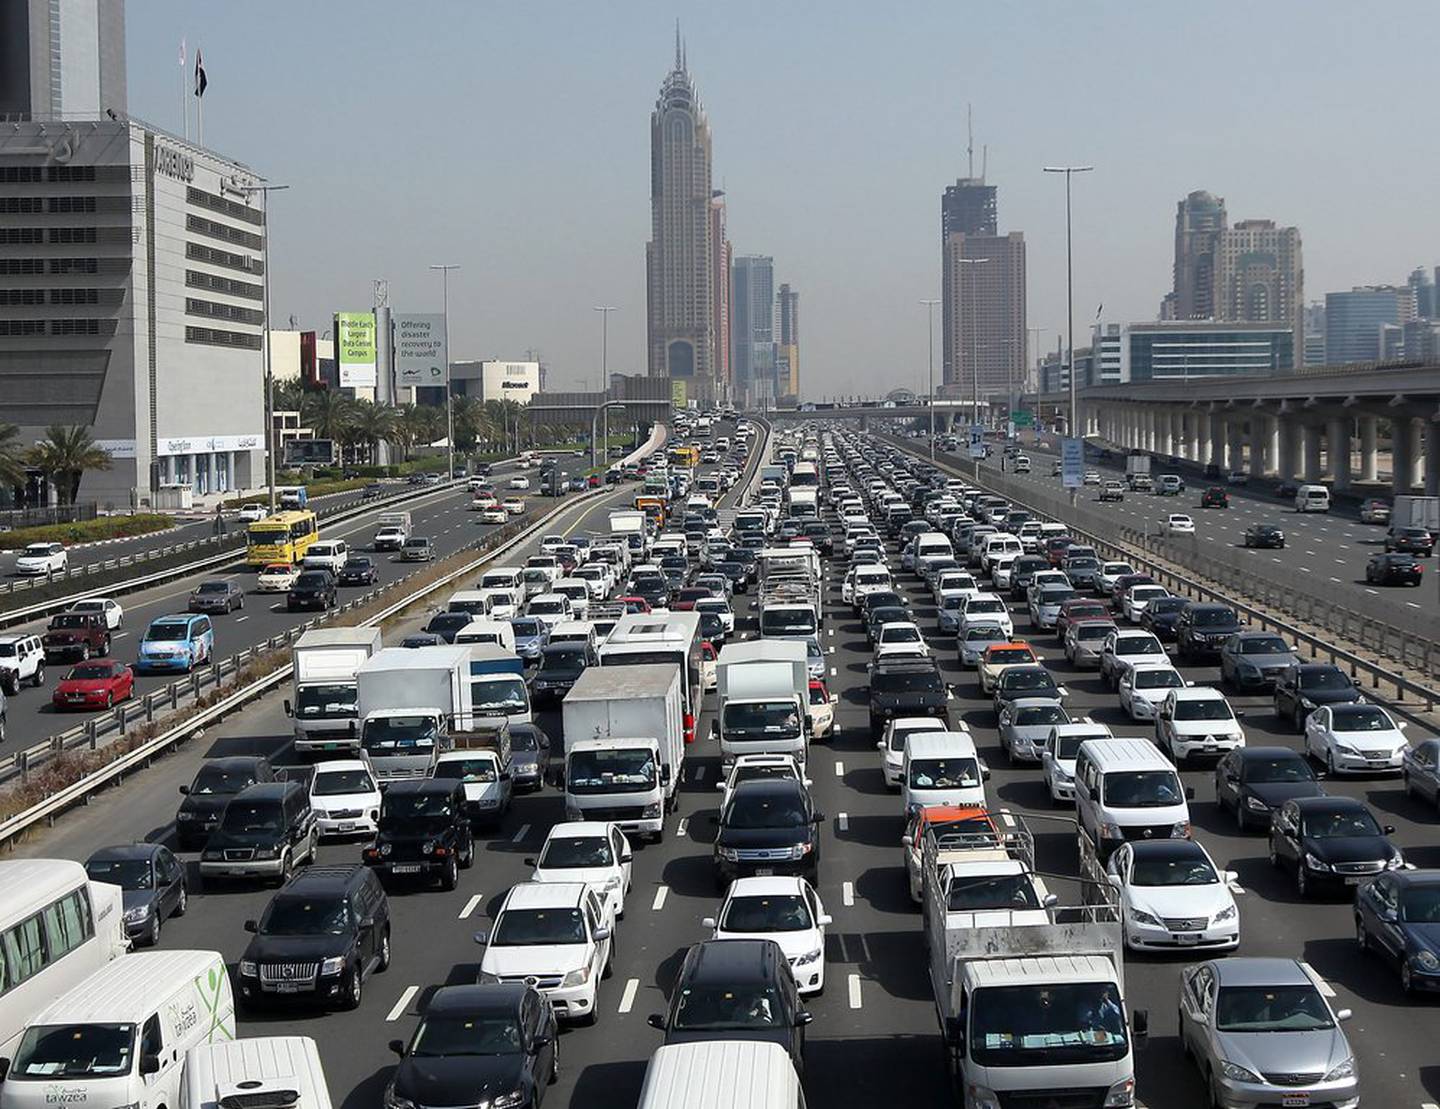 Police have called on the public to report incidents of dangerous driving on Dubai's roads. Pawan Singh / The National

